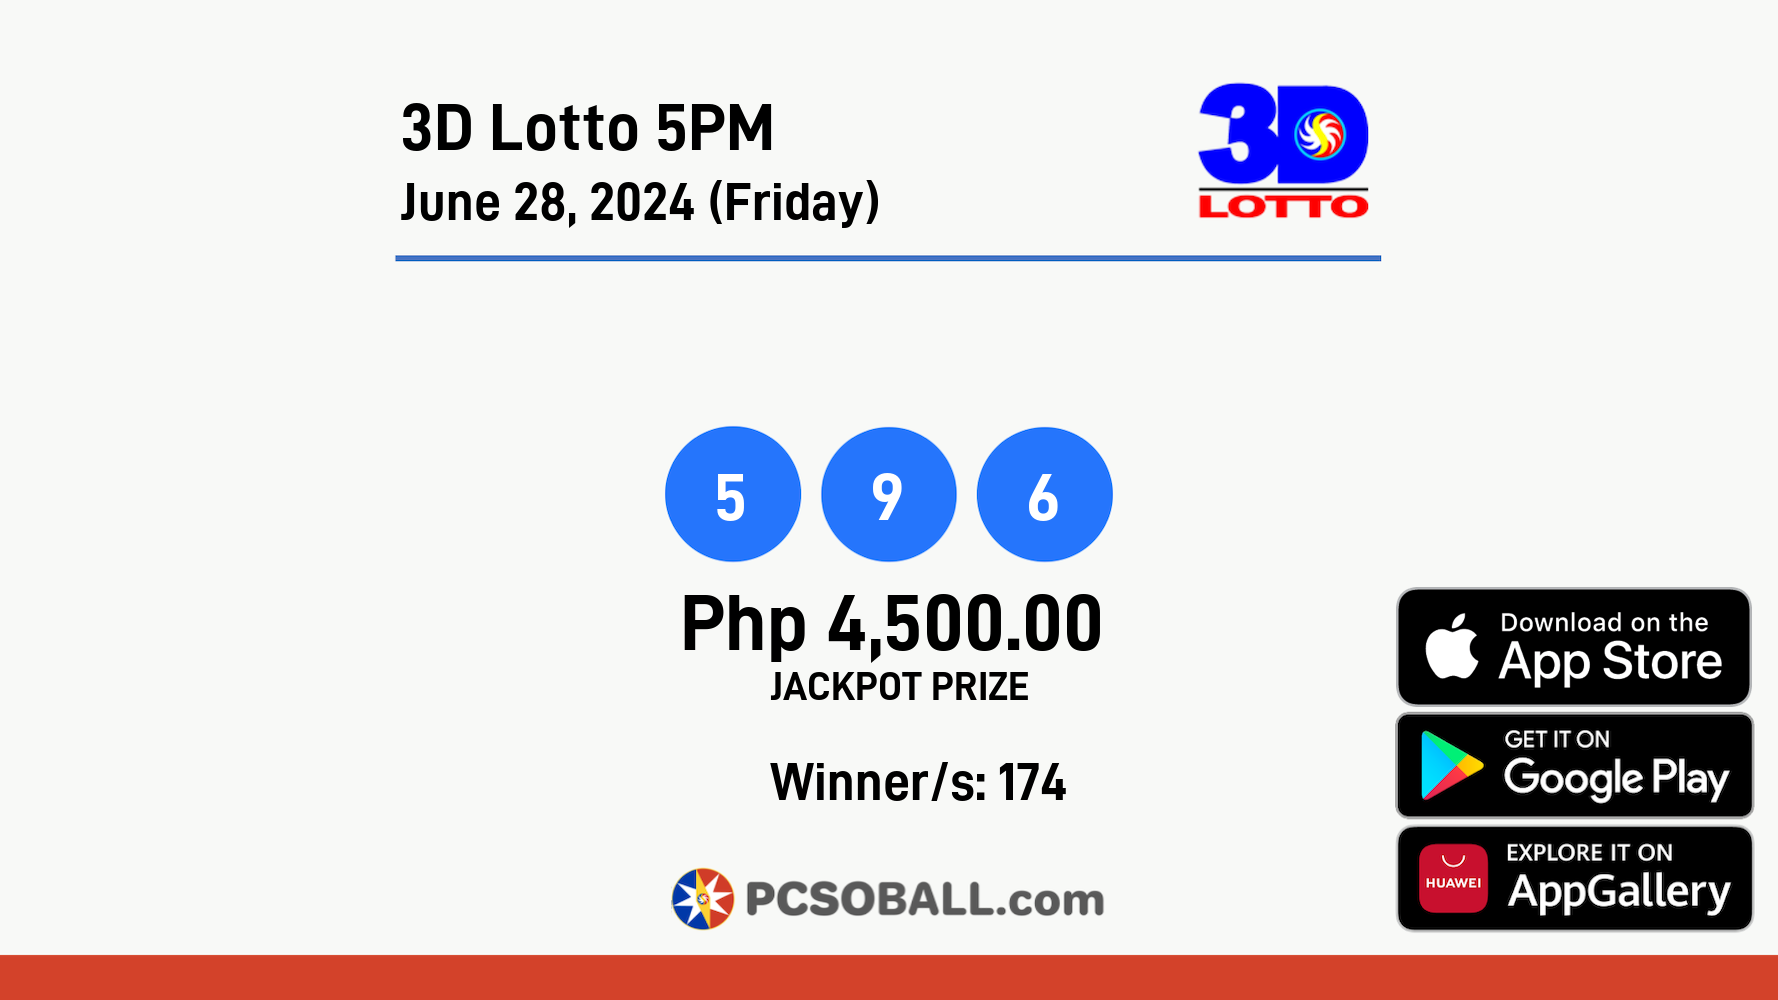 3D Lotto 5PM June 28, 2024 (Friday) Result